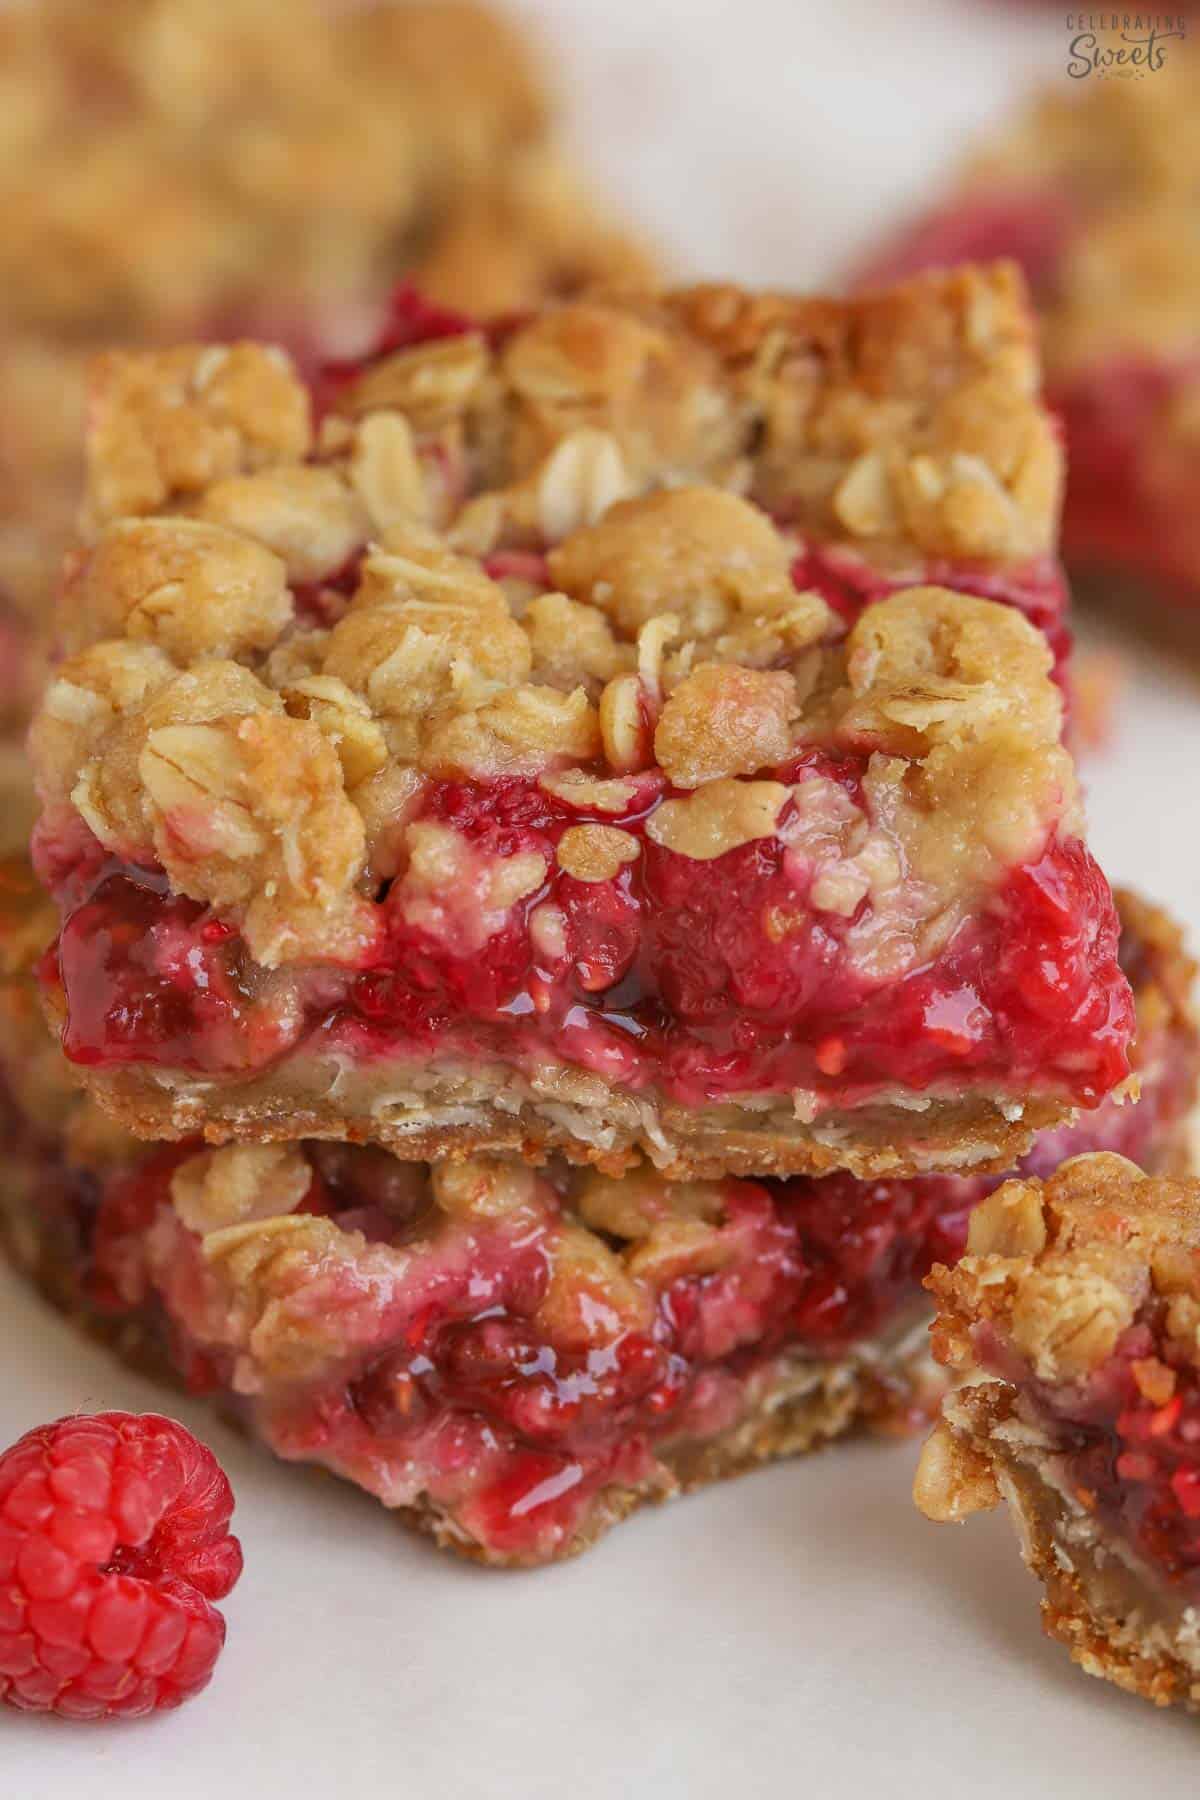 Two raspberry bars stacked on top of each other.